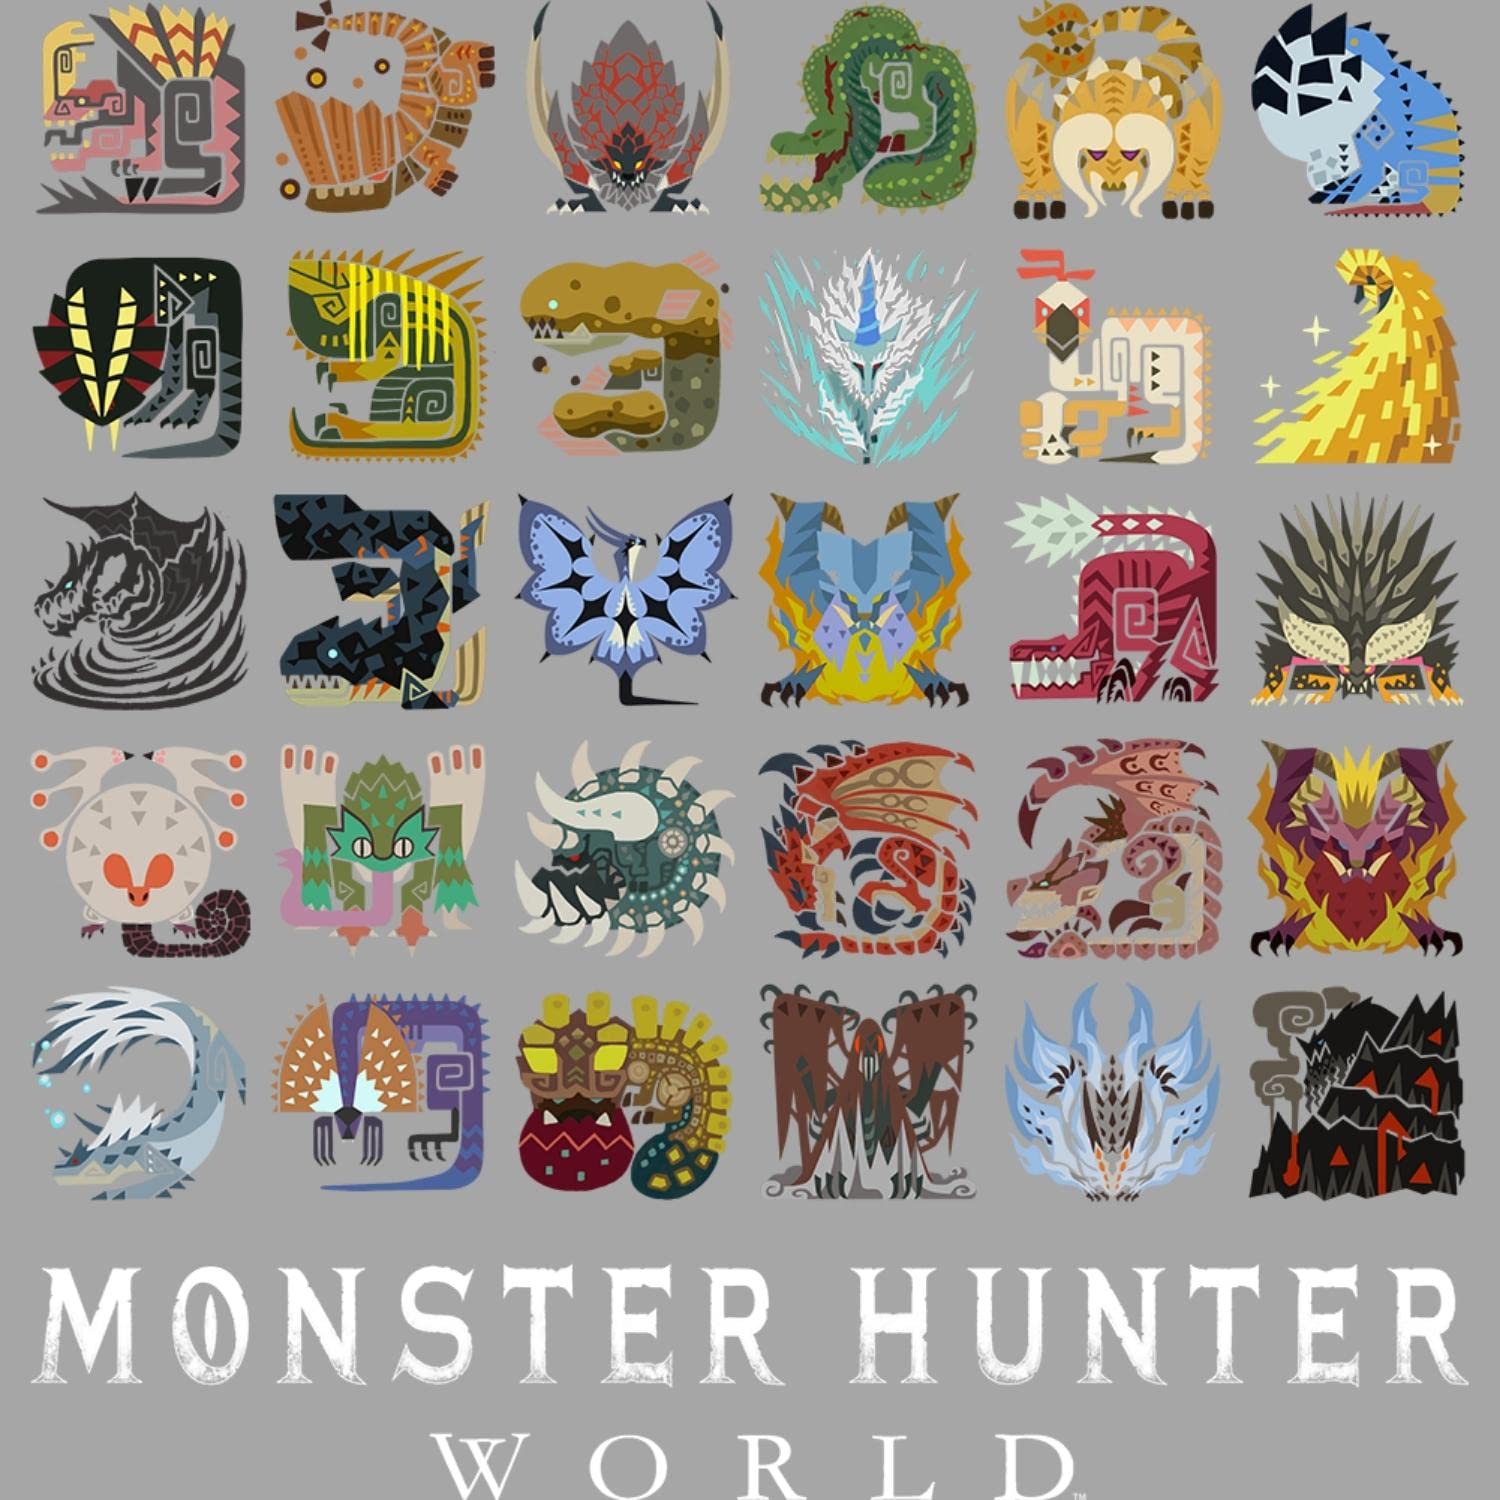 Monster Hunter Fantasy Action Role-Playing Video Game Icon Textiles T-Shirt Tee